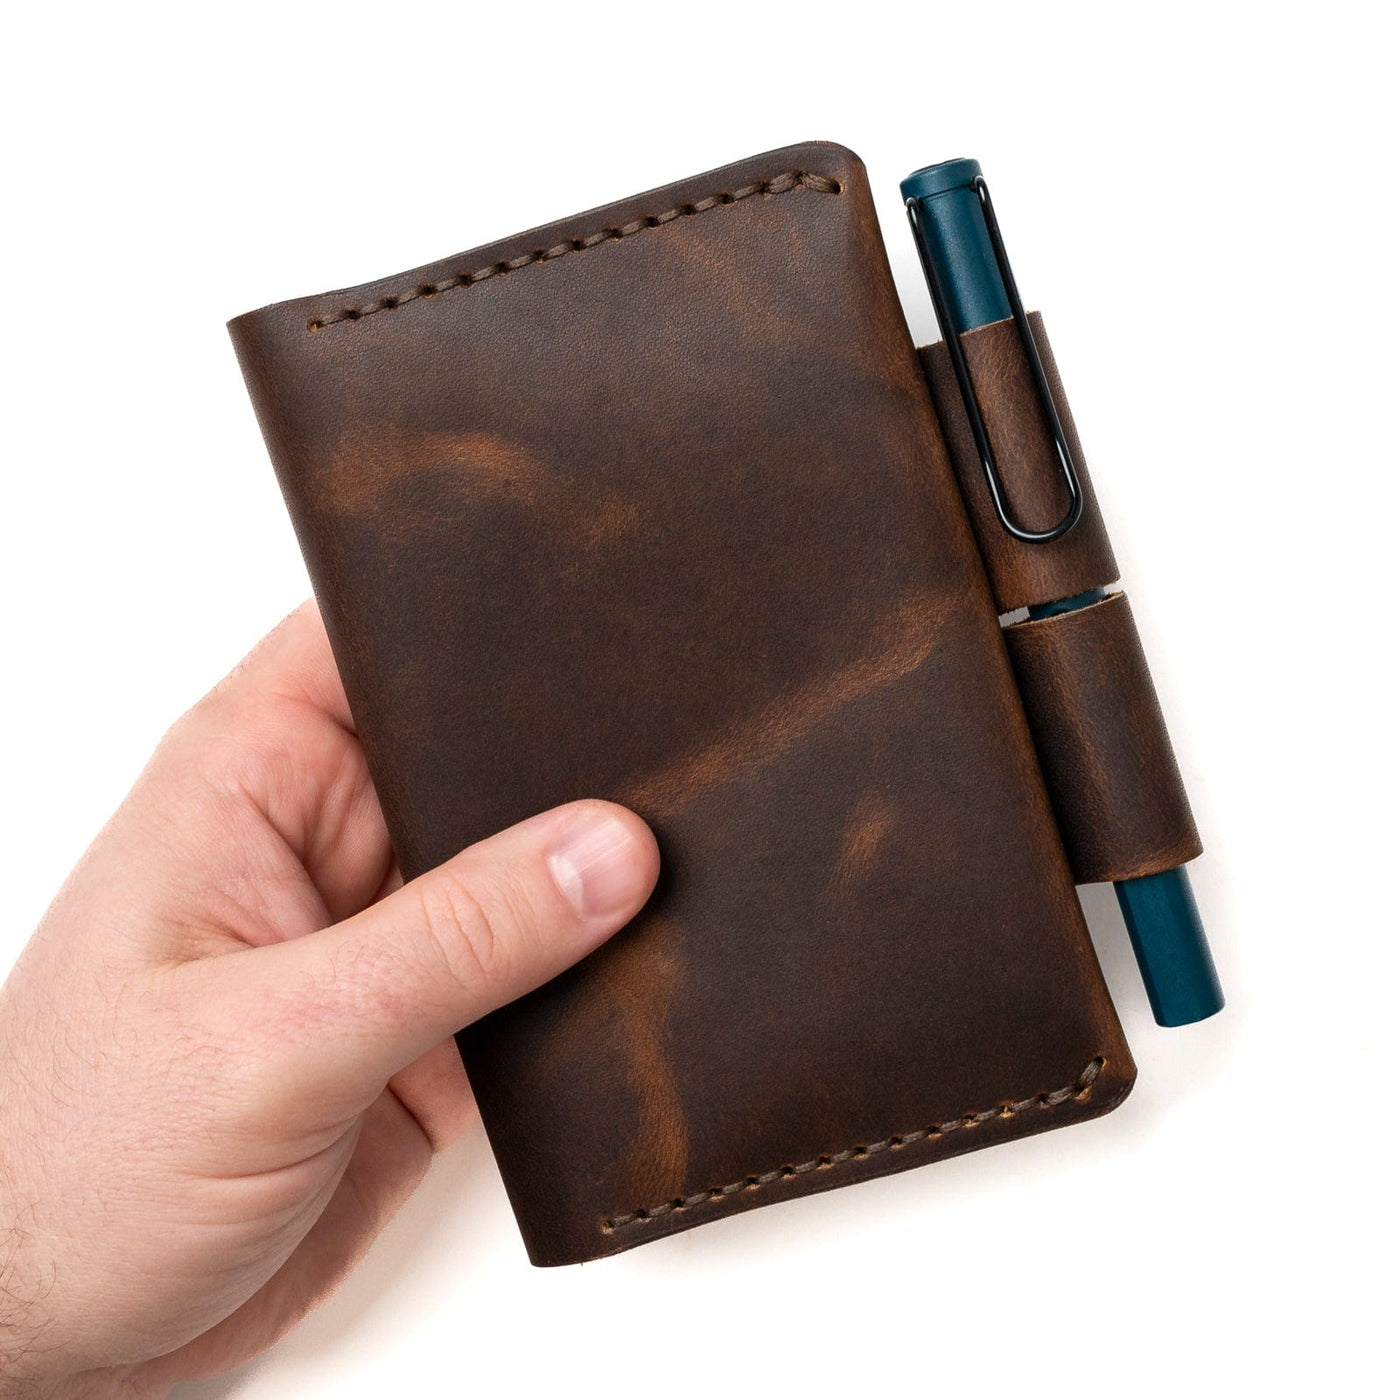 Leather Field Notes Cover - Heritage Brown Popov Leather